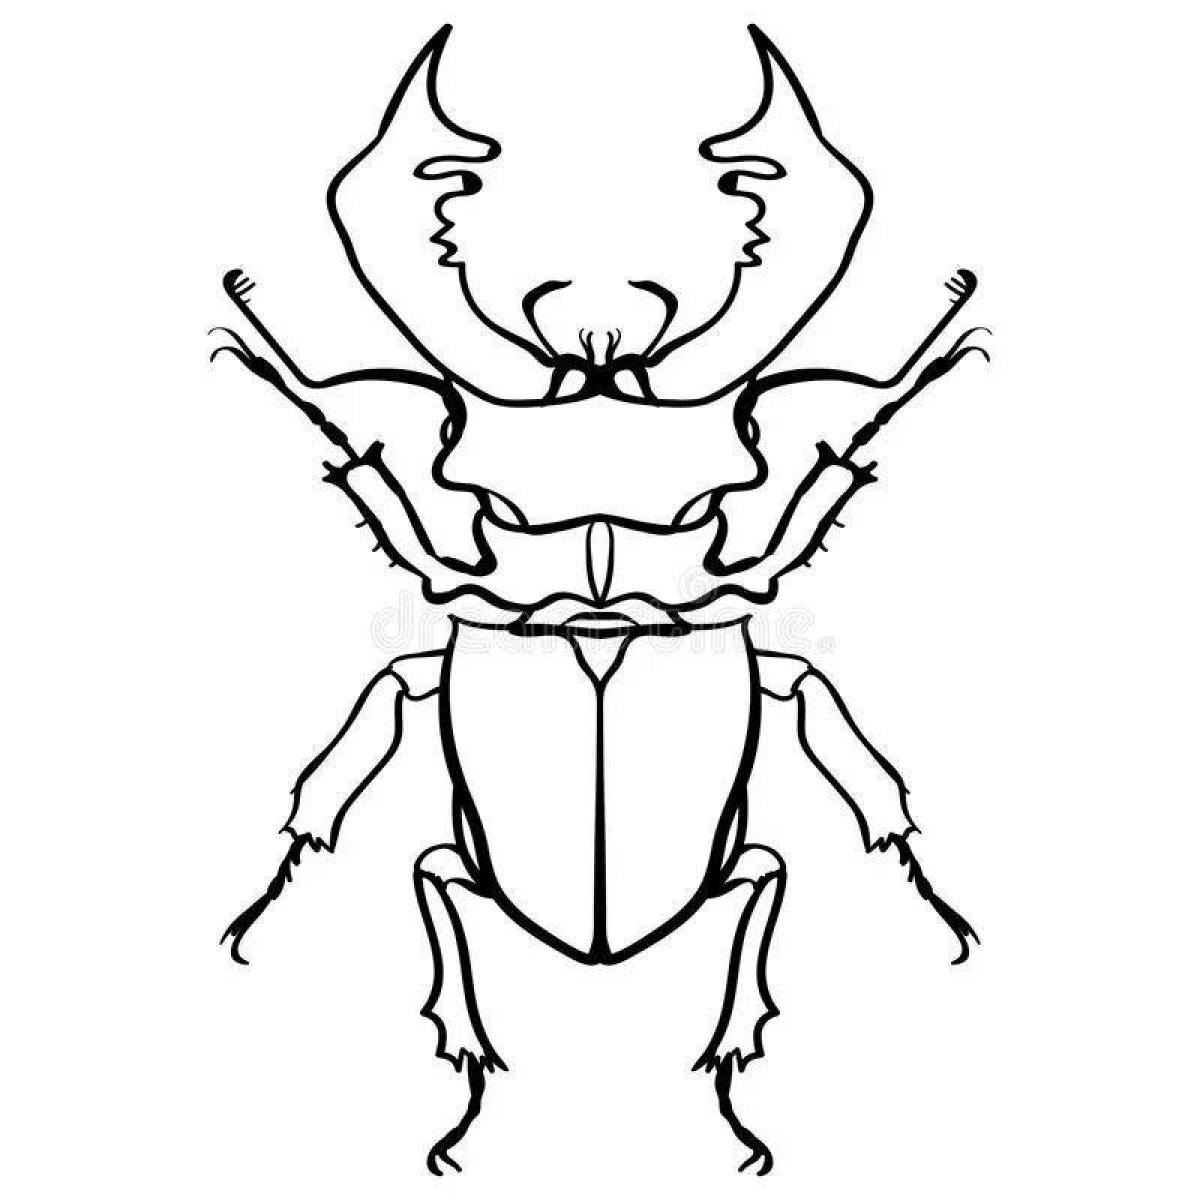 Stag beetle dazzling coloring book